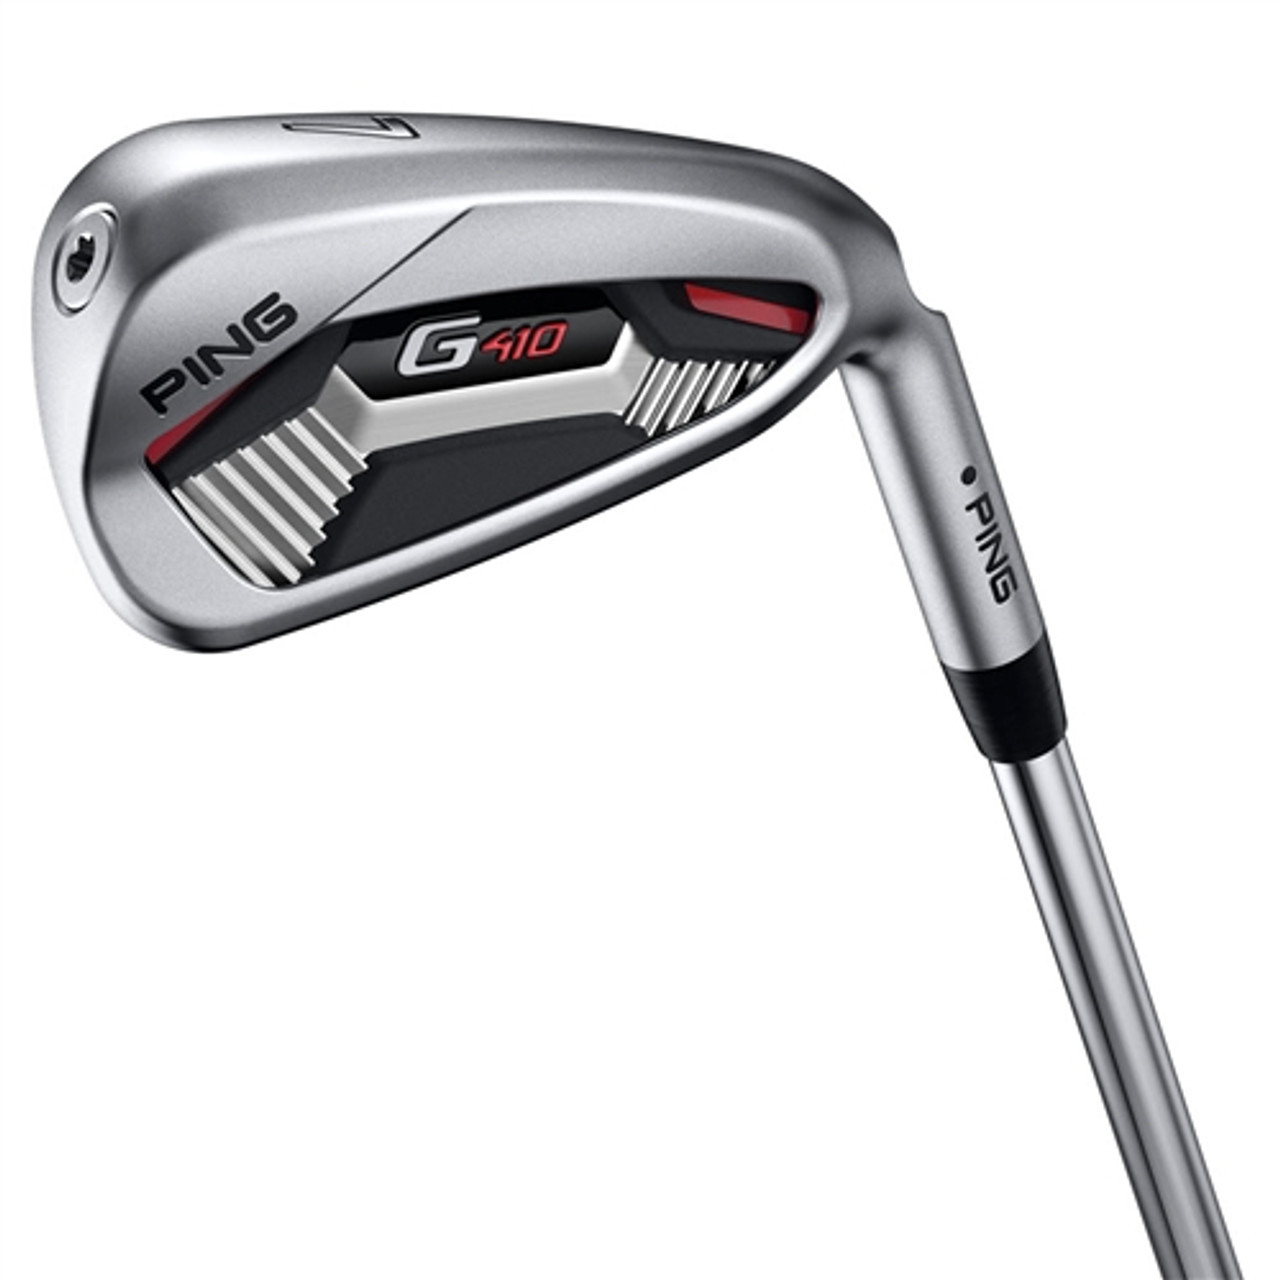 PING Golf G410 Individual Irons - REPLACEMENT IRONS ONLY